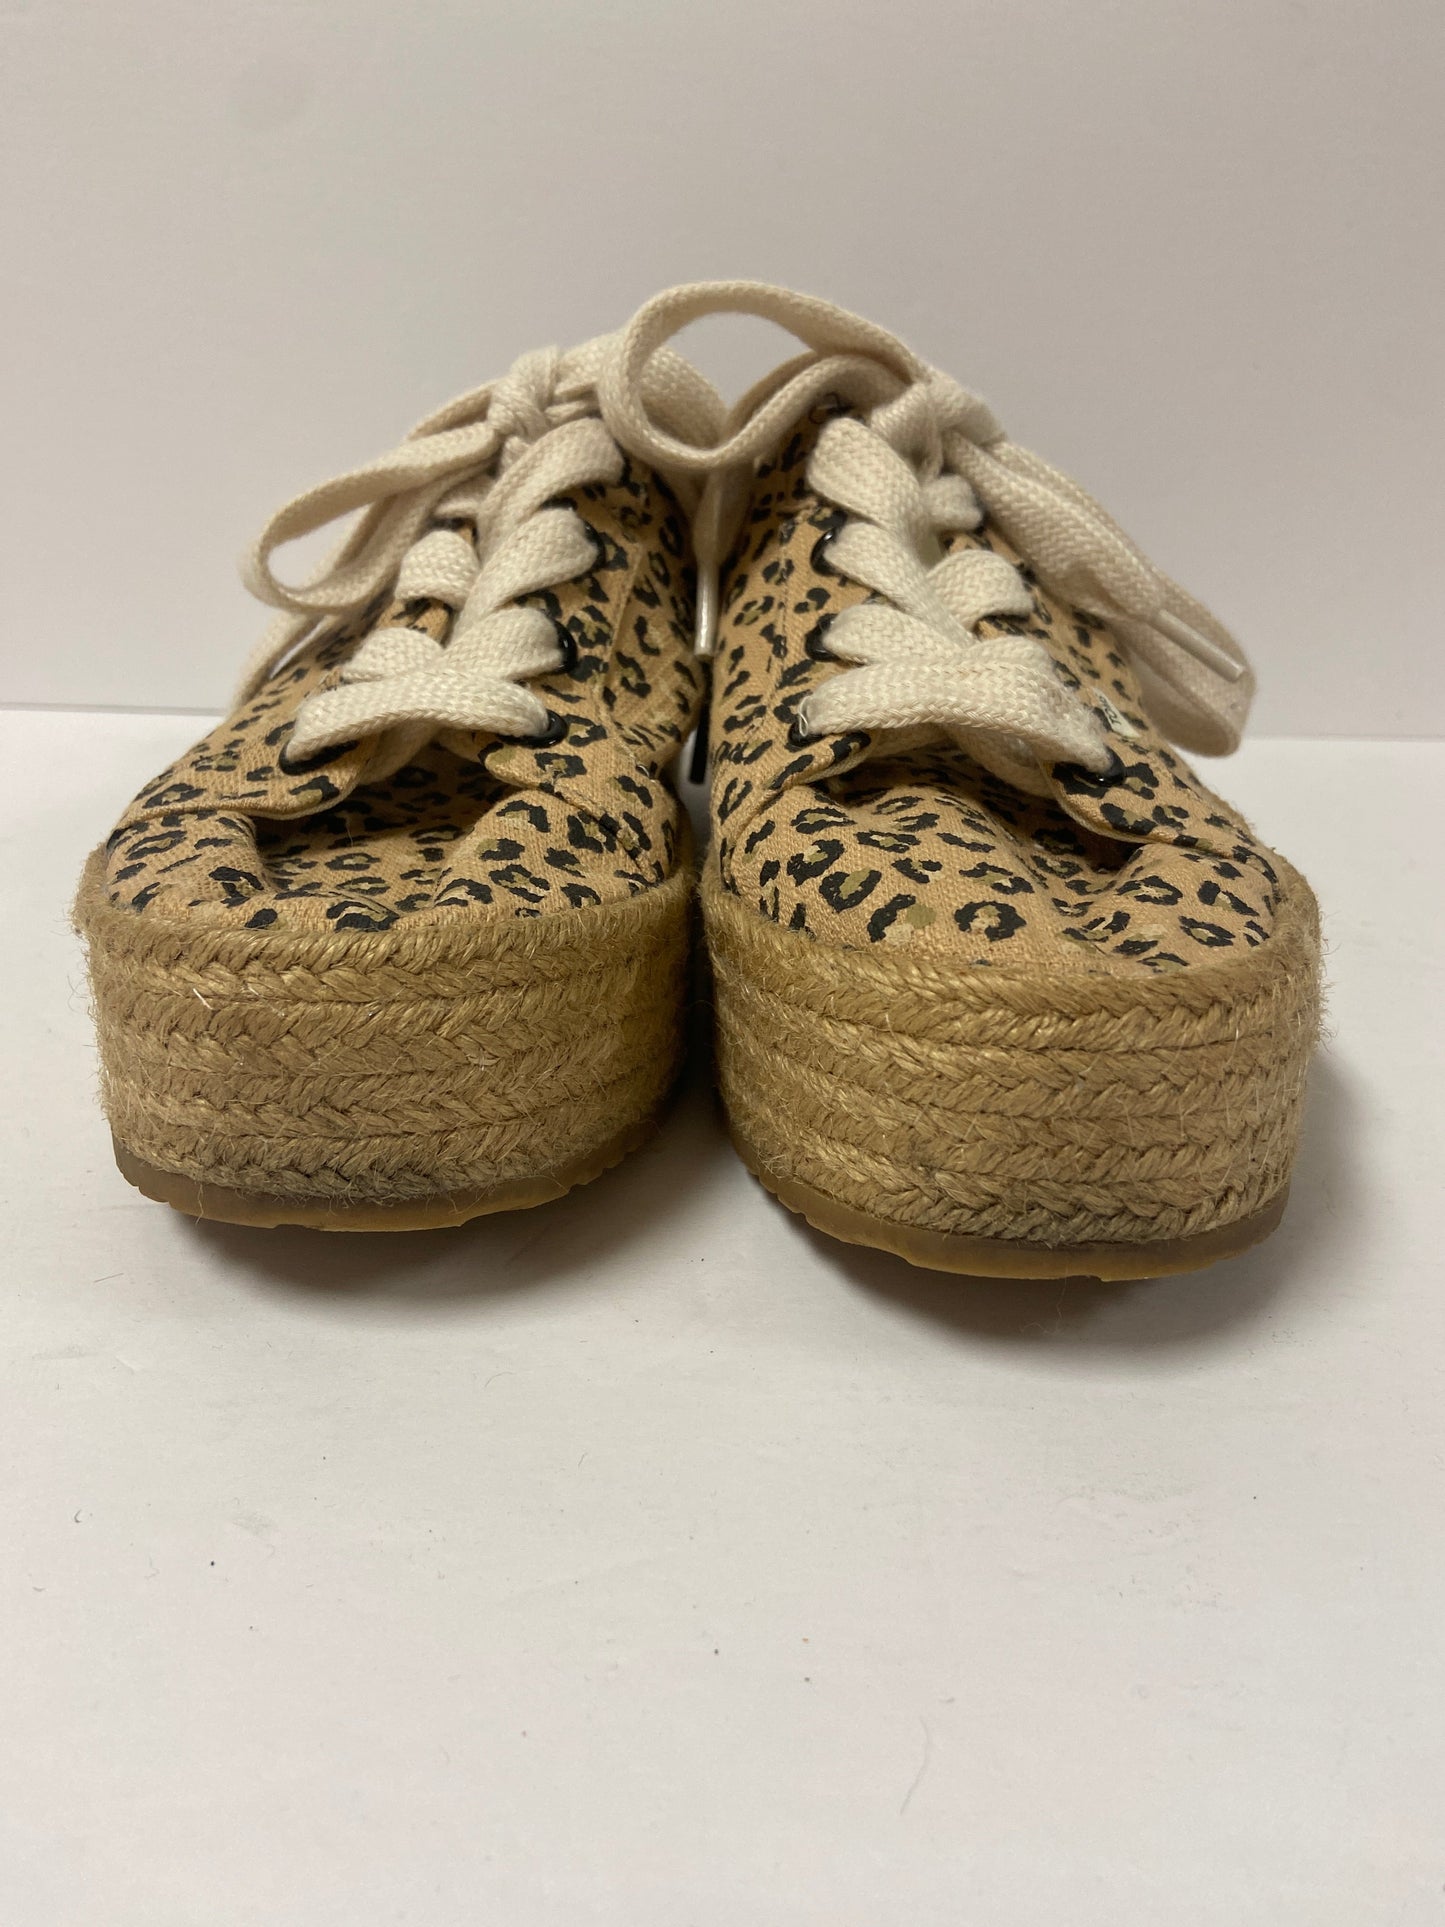 Shoes Flats Espadrille By Toms  Size: 9.5